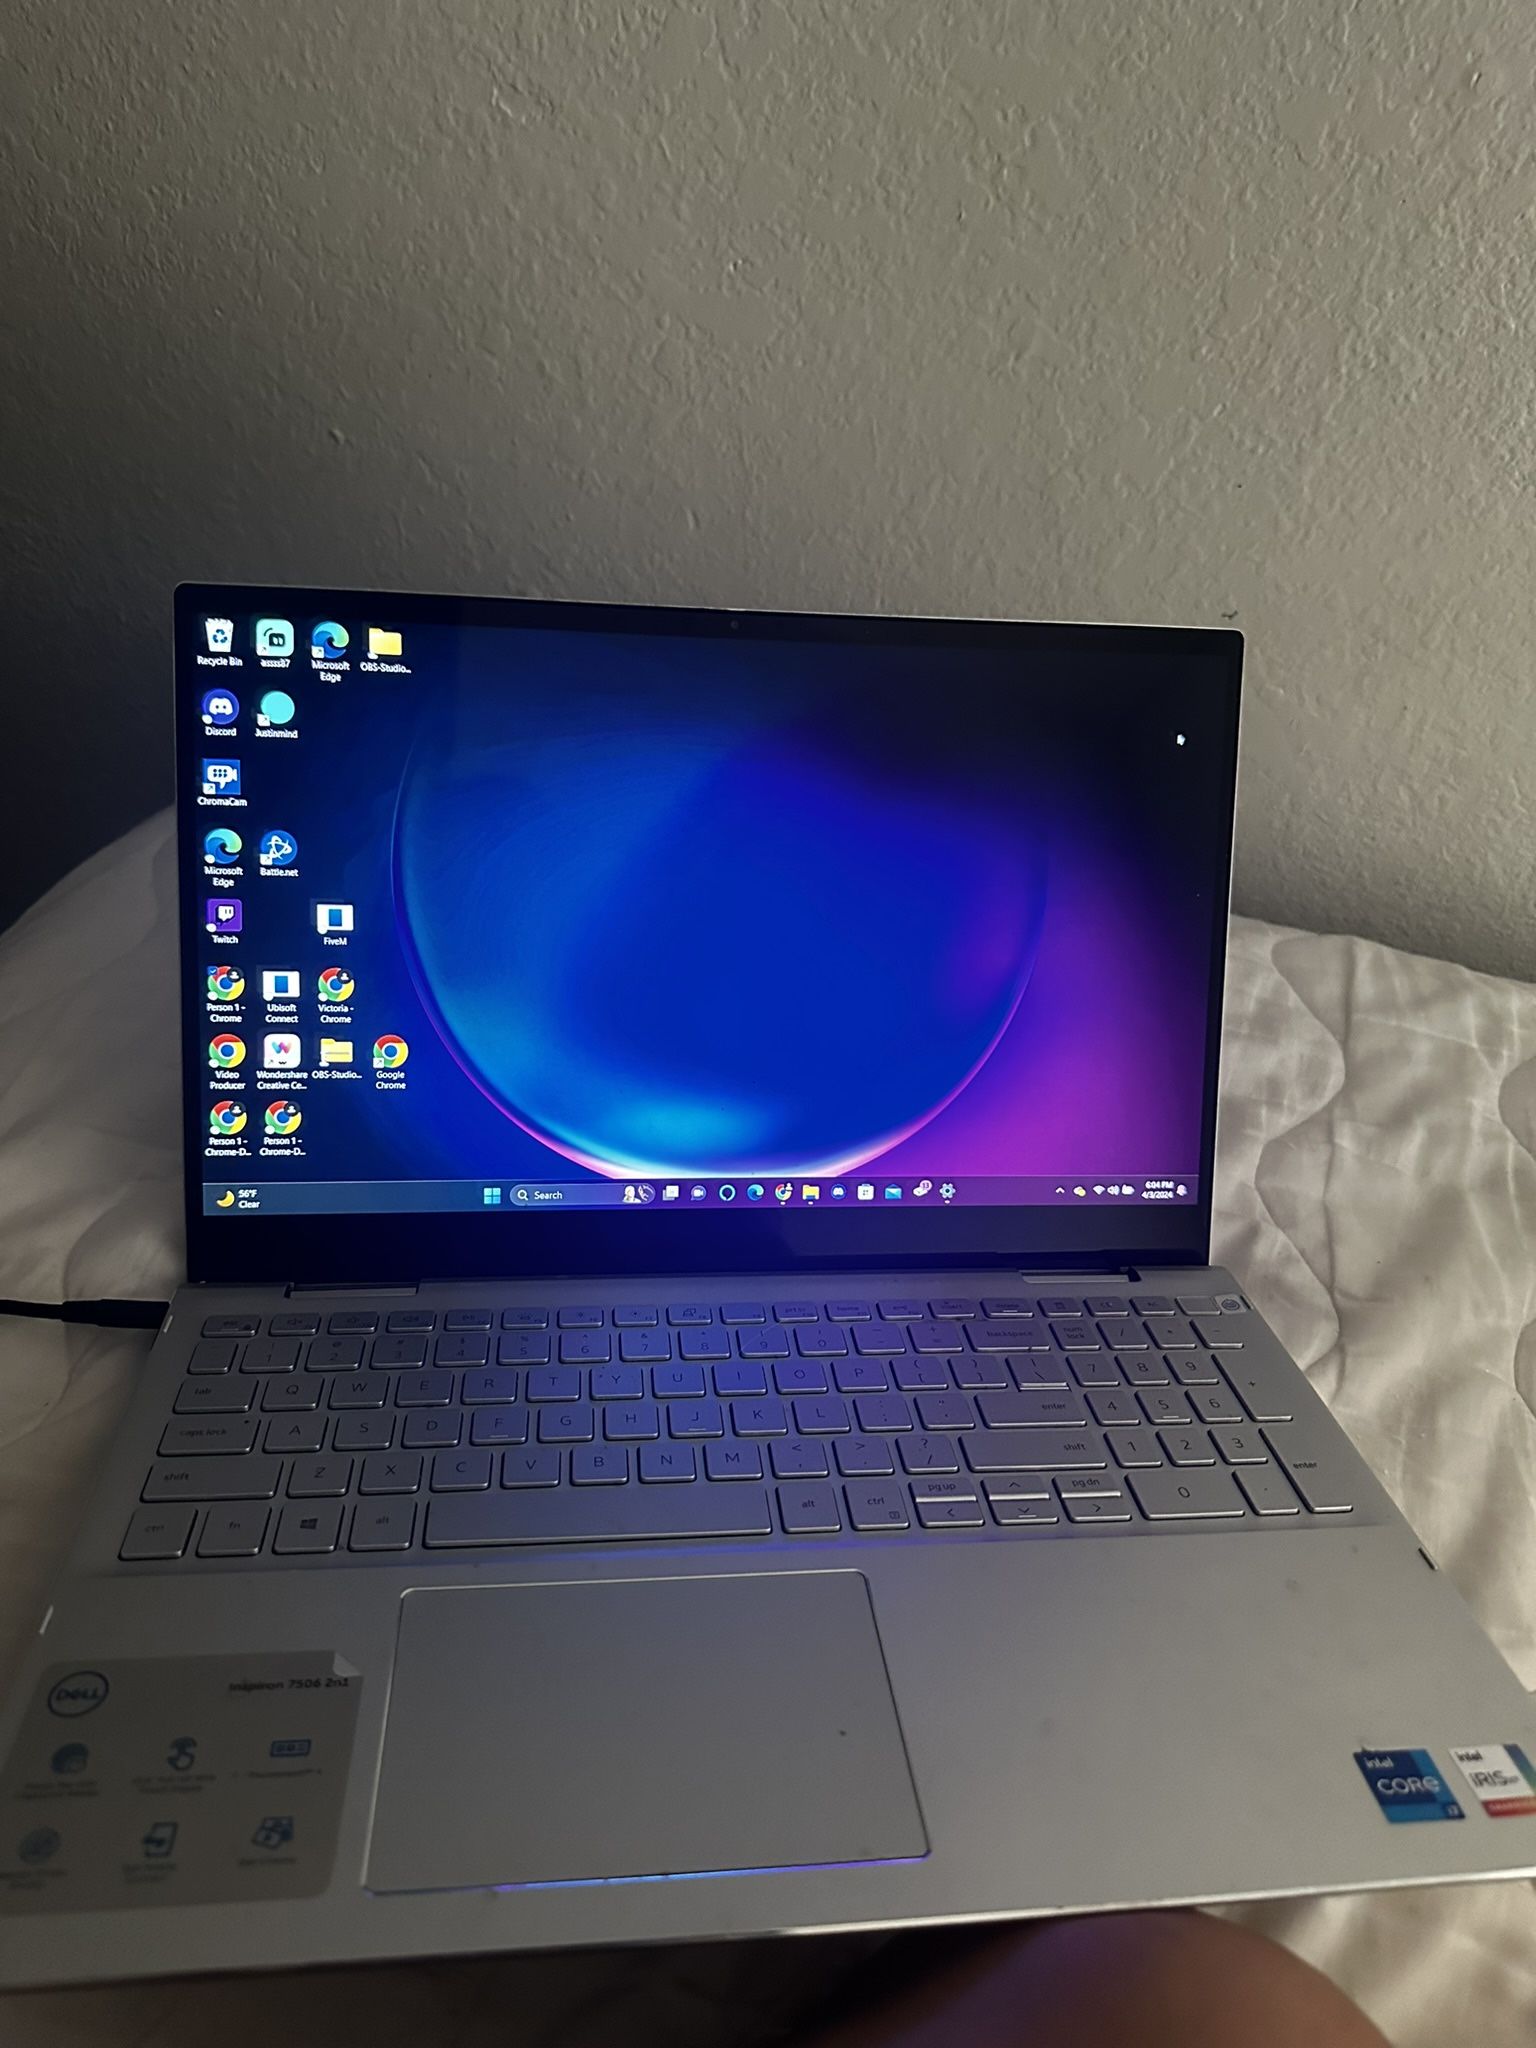 Dell Inspiron 7506 2-in-1 Laptop